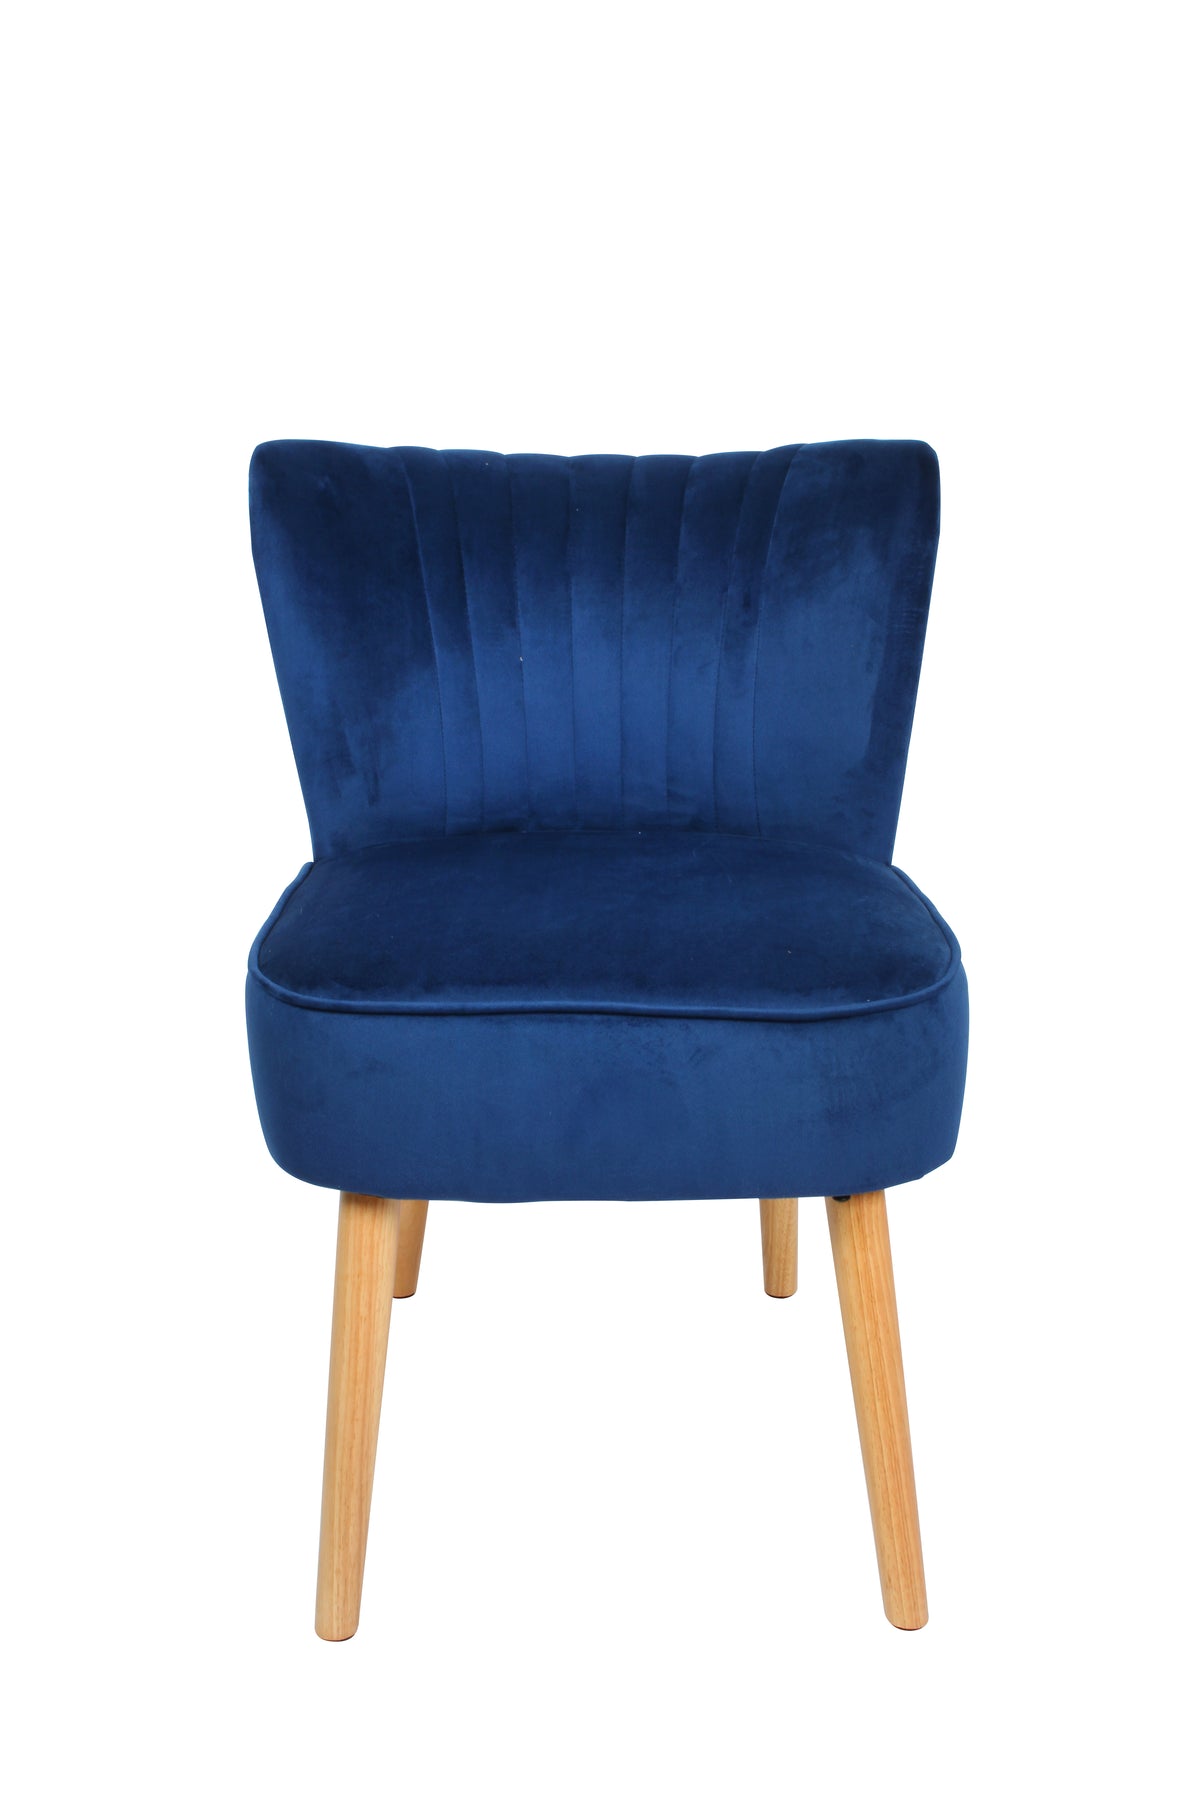 Navy Blue Velvet and Wood Accent Chair